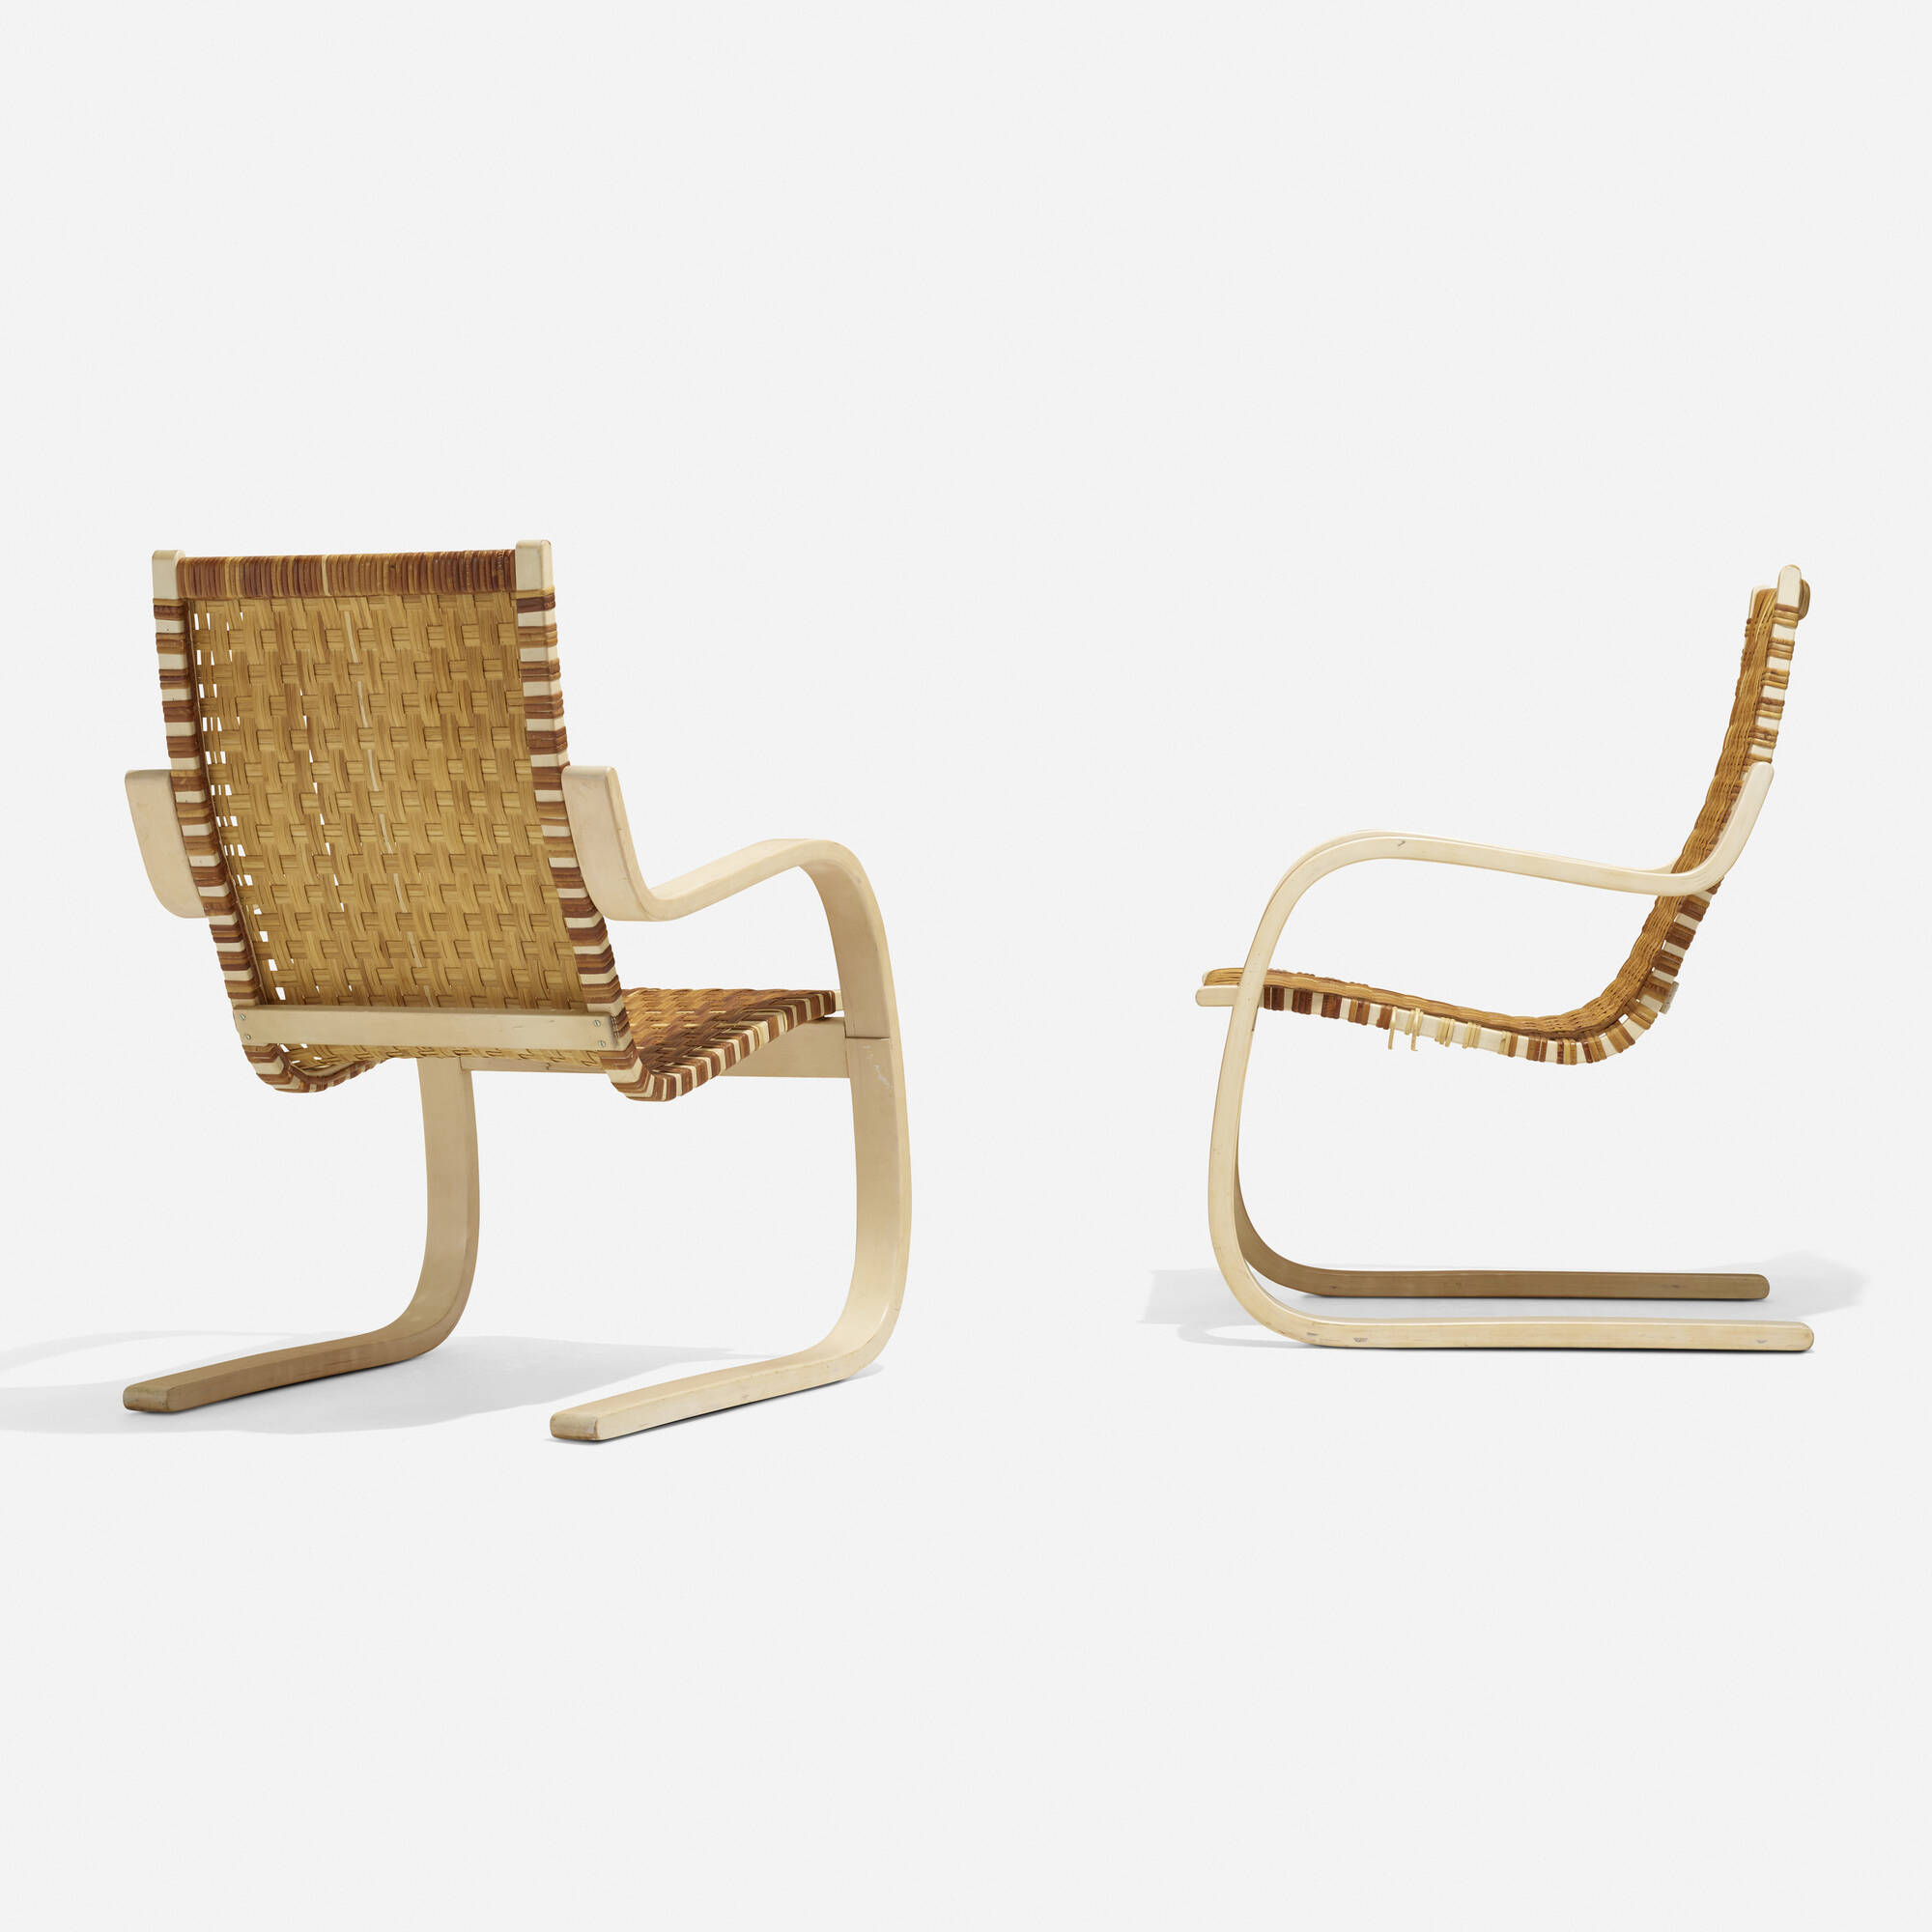 160: ALVAR AALTO, Cantilevered chairs model 406, pair < Scandinavian 2023 < | Wright: Auctions of Art and Design